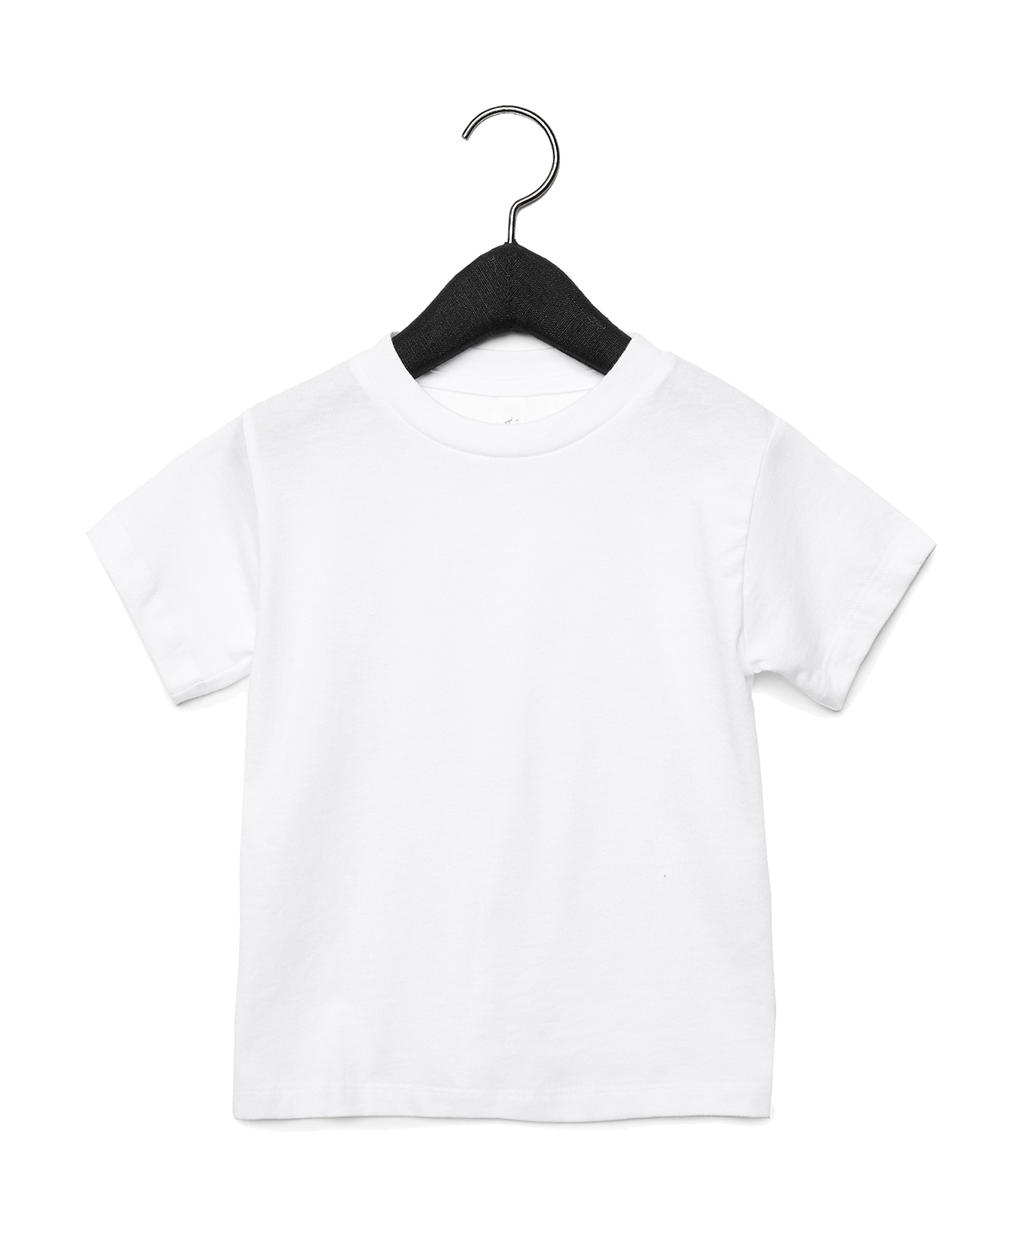  Toddler Jersey Short Sleeve Tee in Farbe White